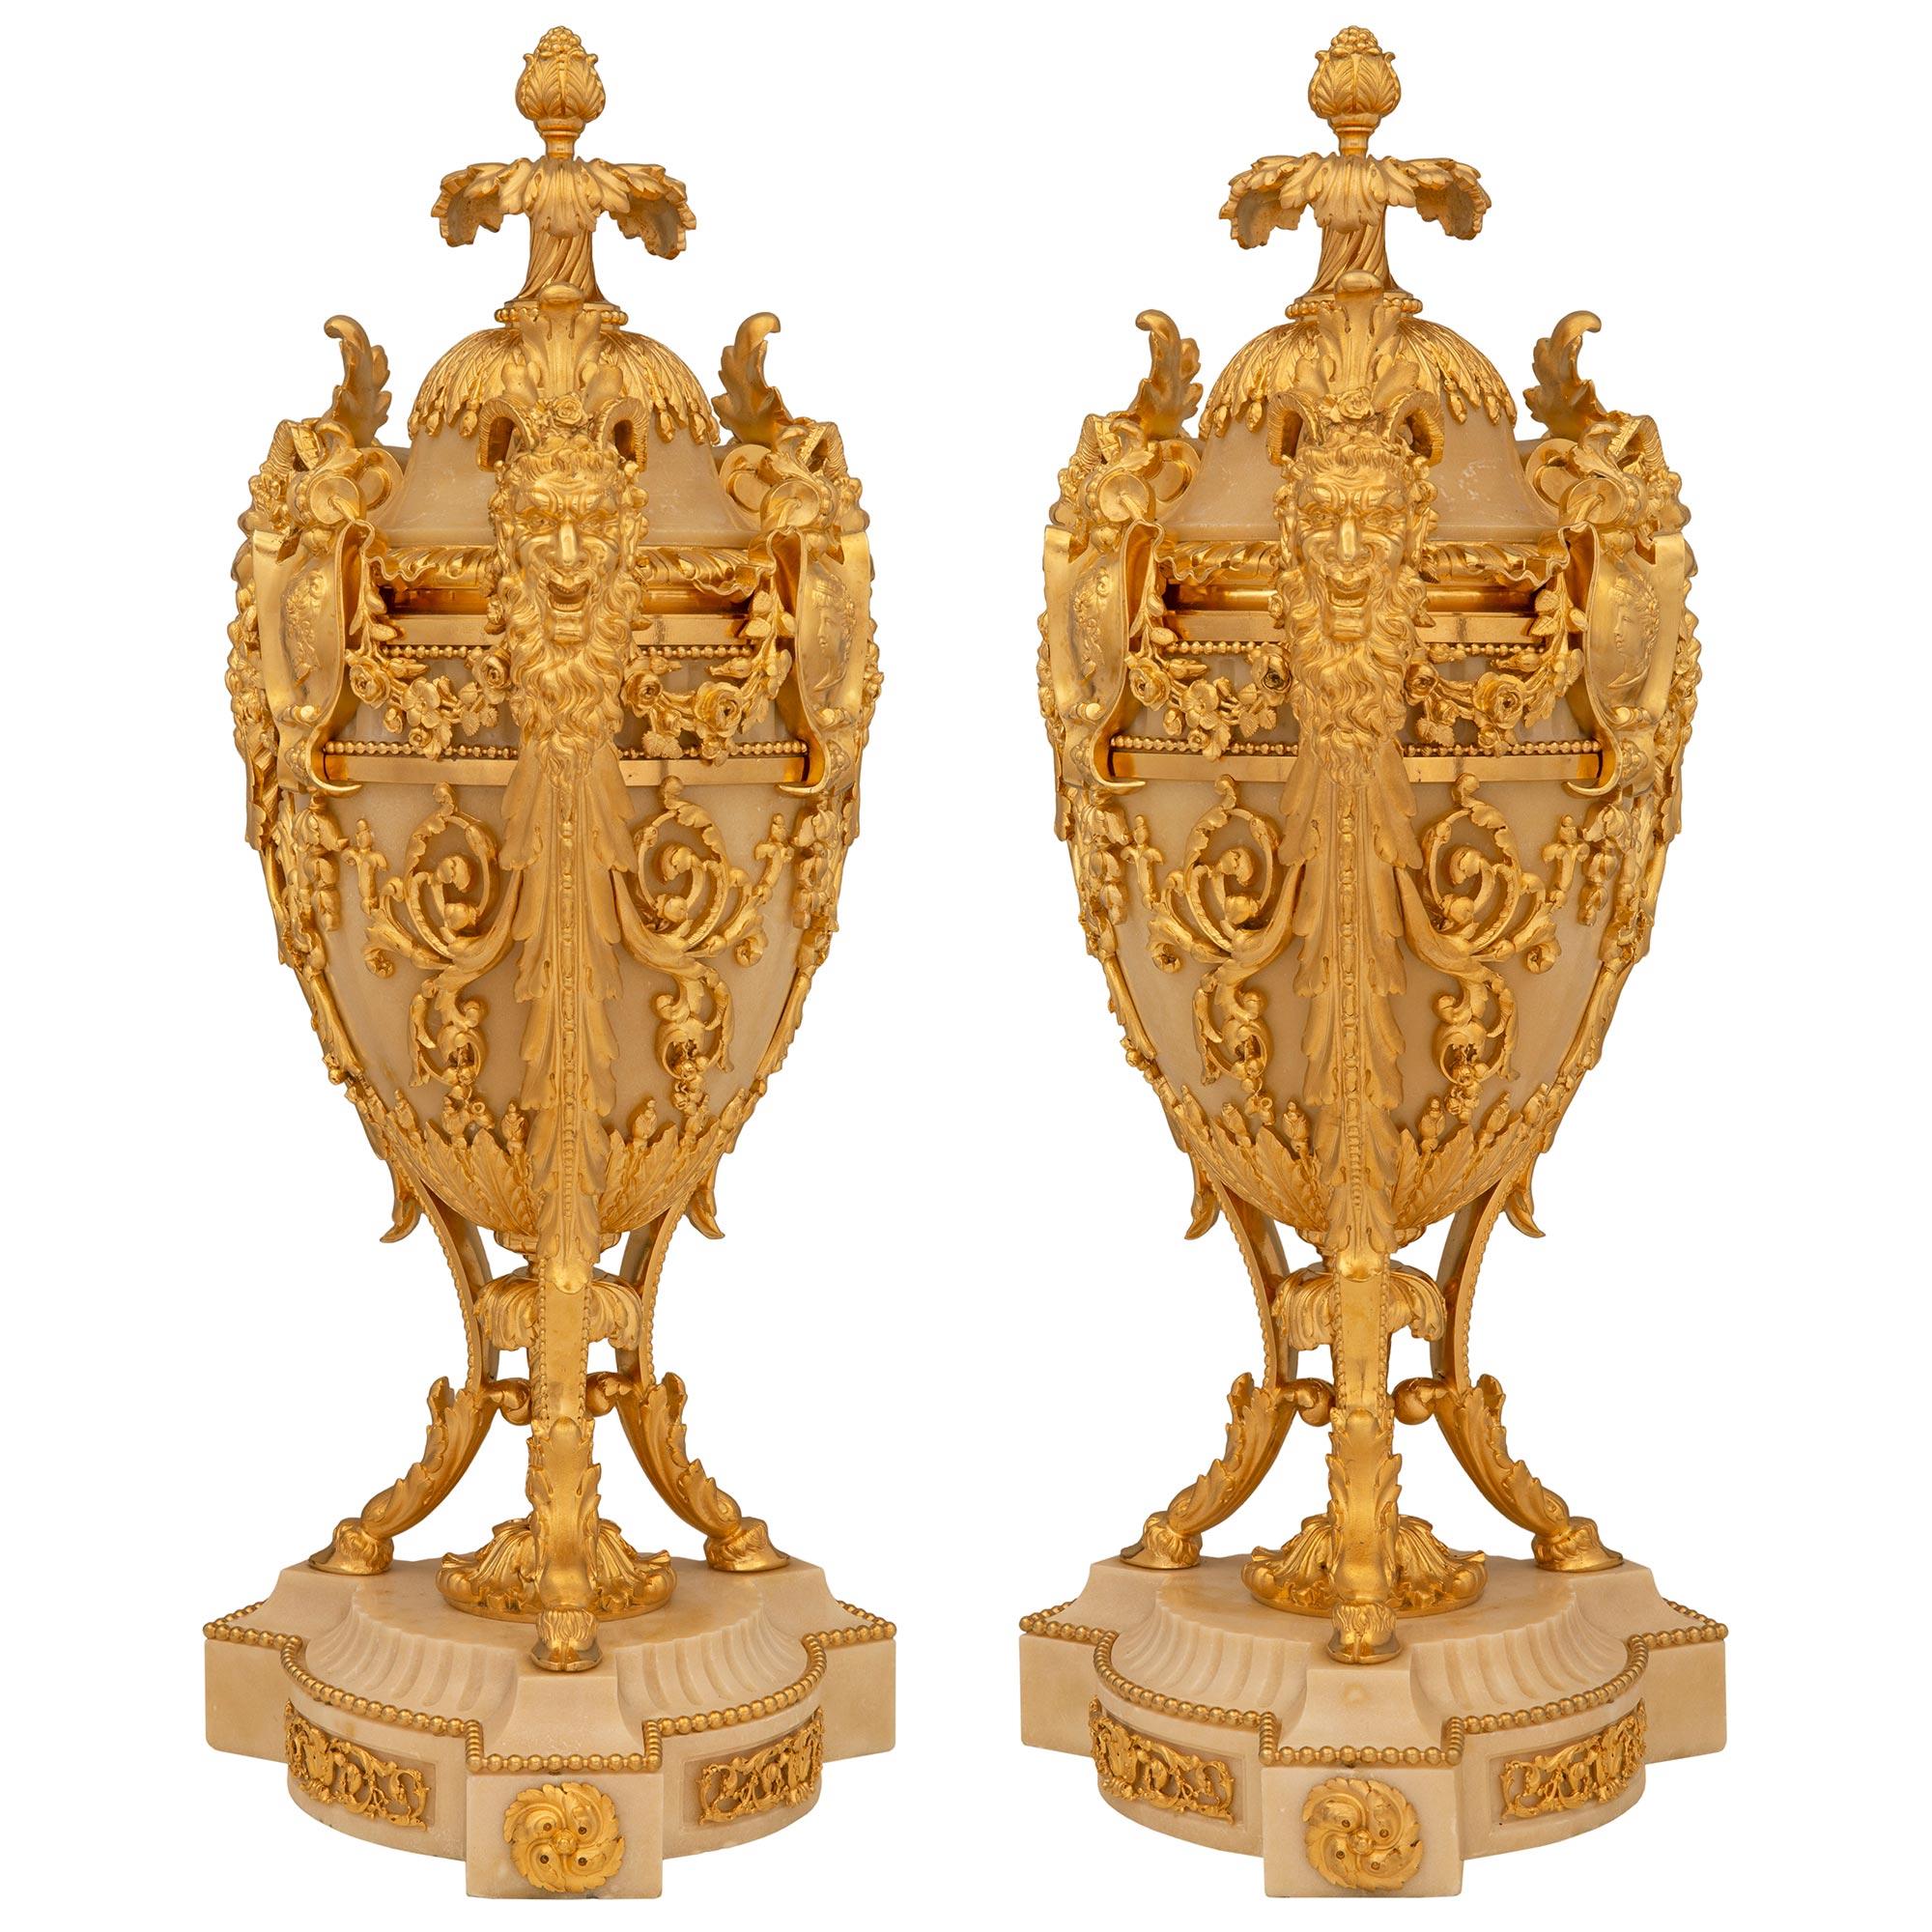 A sensational and extremely high quality pair of French 19th century Louis XVI st. Belle Époque period Alabaster and ormolu urns. Each urn is raised by a beautiful fluted Alabaster base with cut corners and adorned with most decorative ormolu